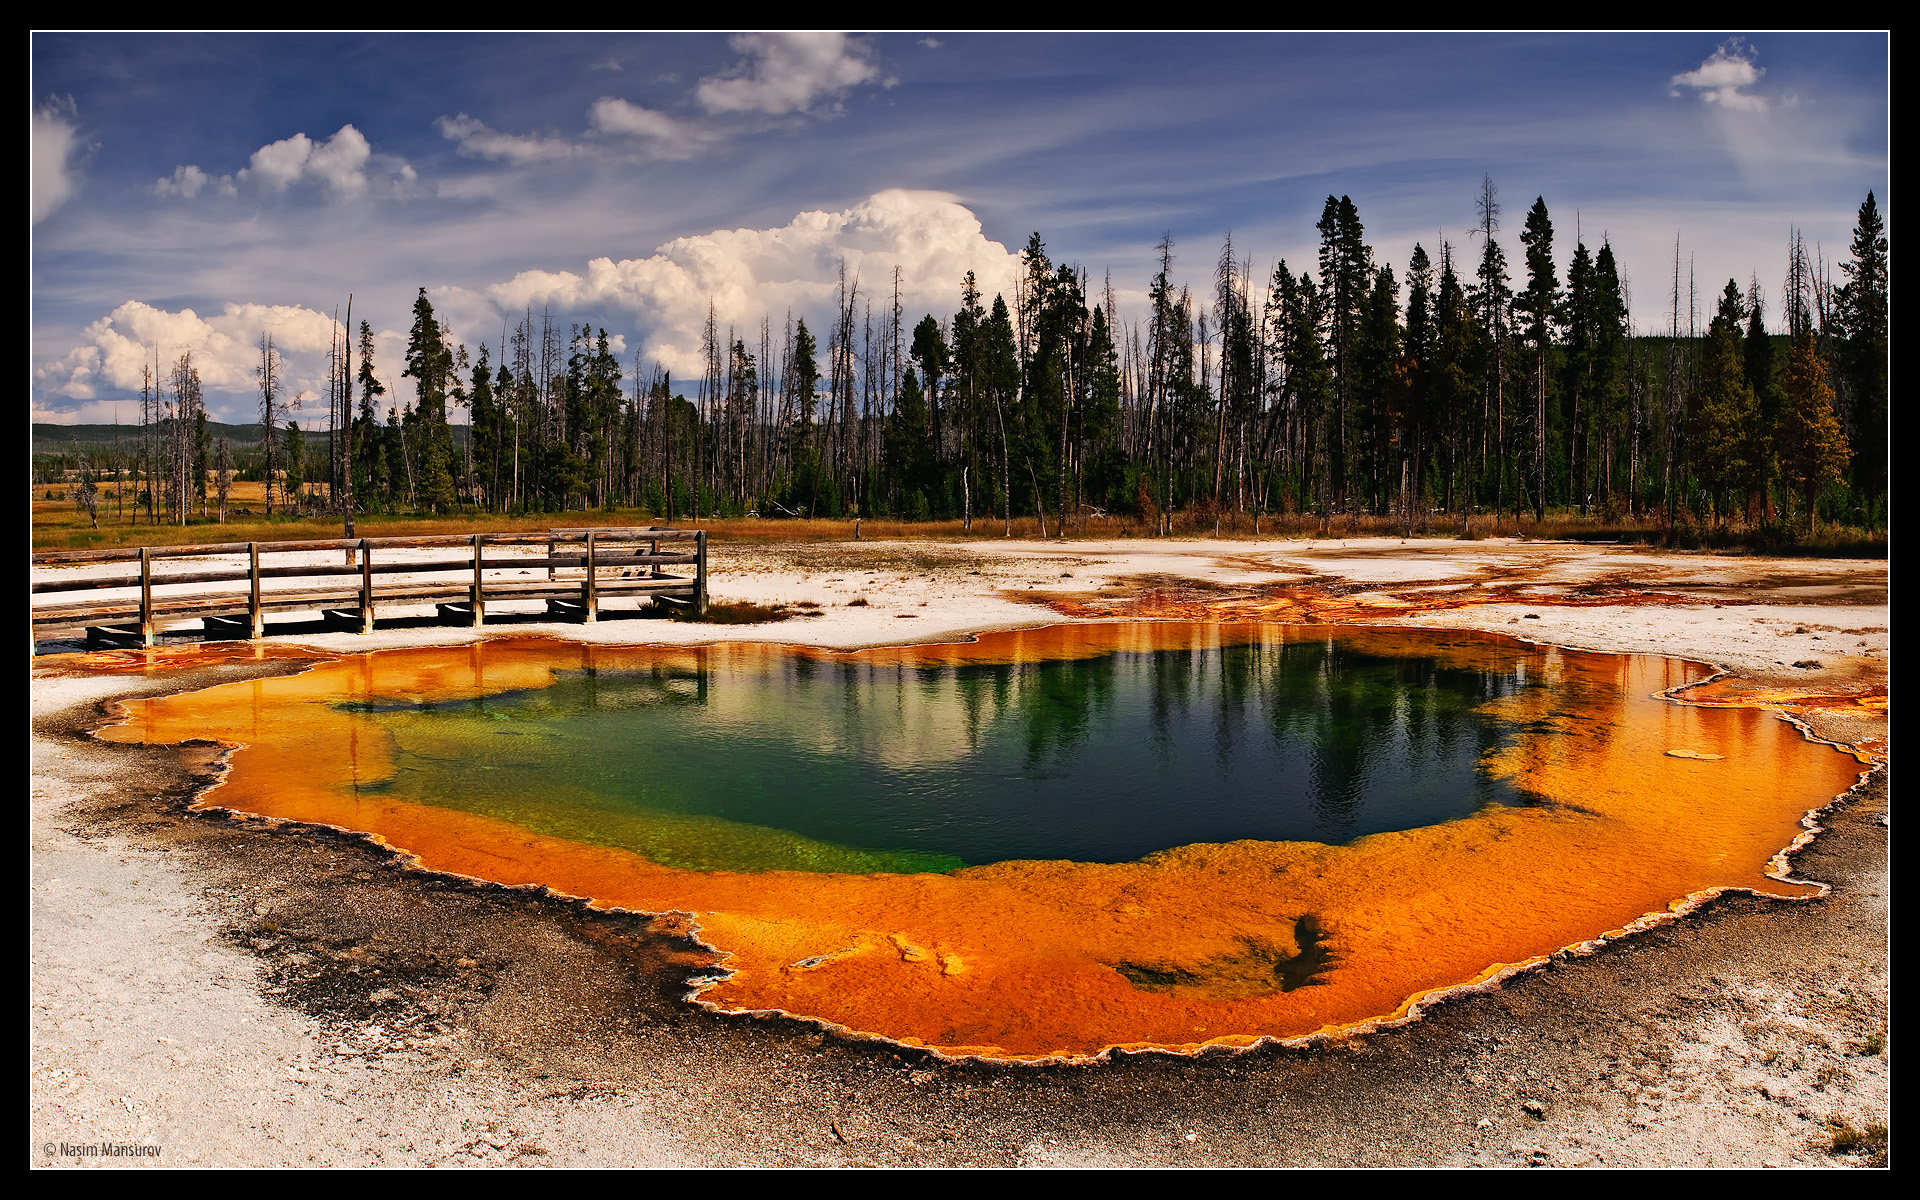 yellowstone wallpaper,body of water,nature,natural landscape,water resources,wilderness